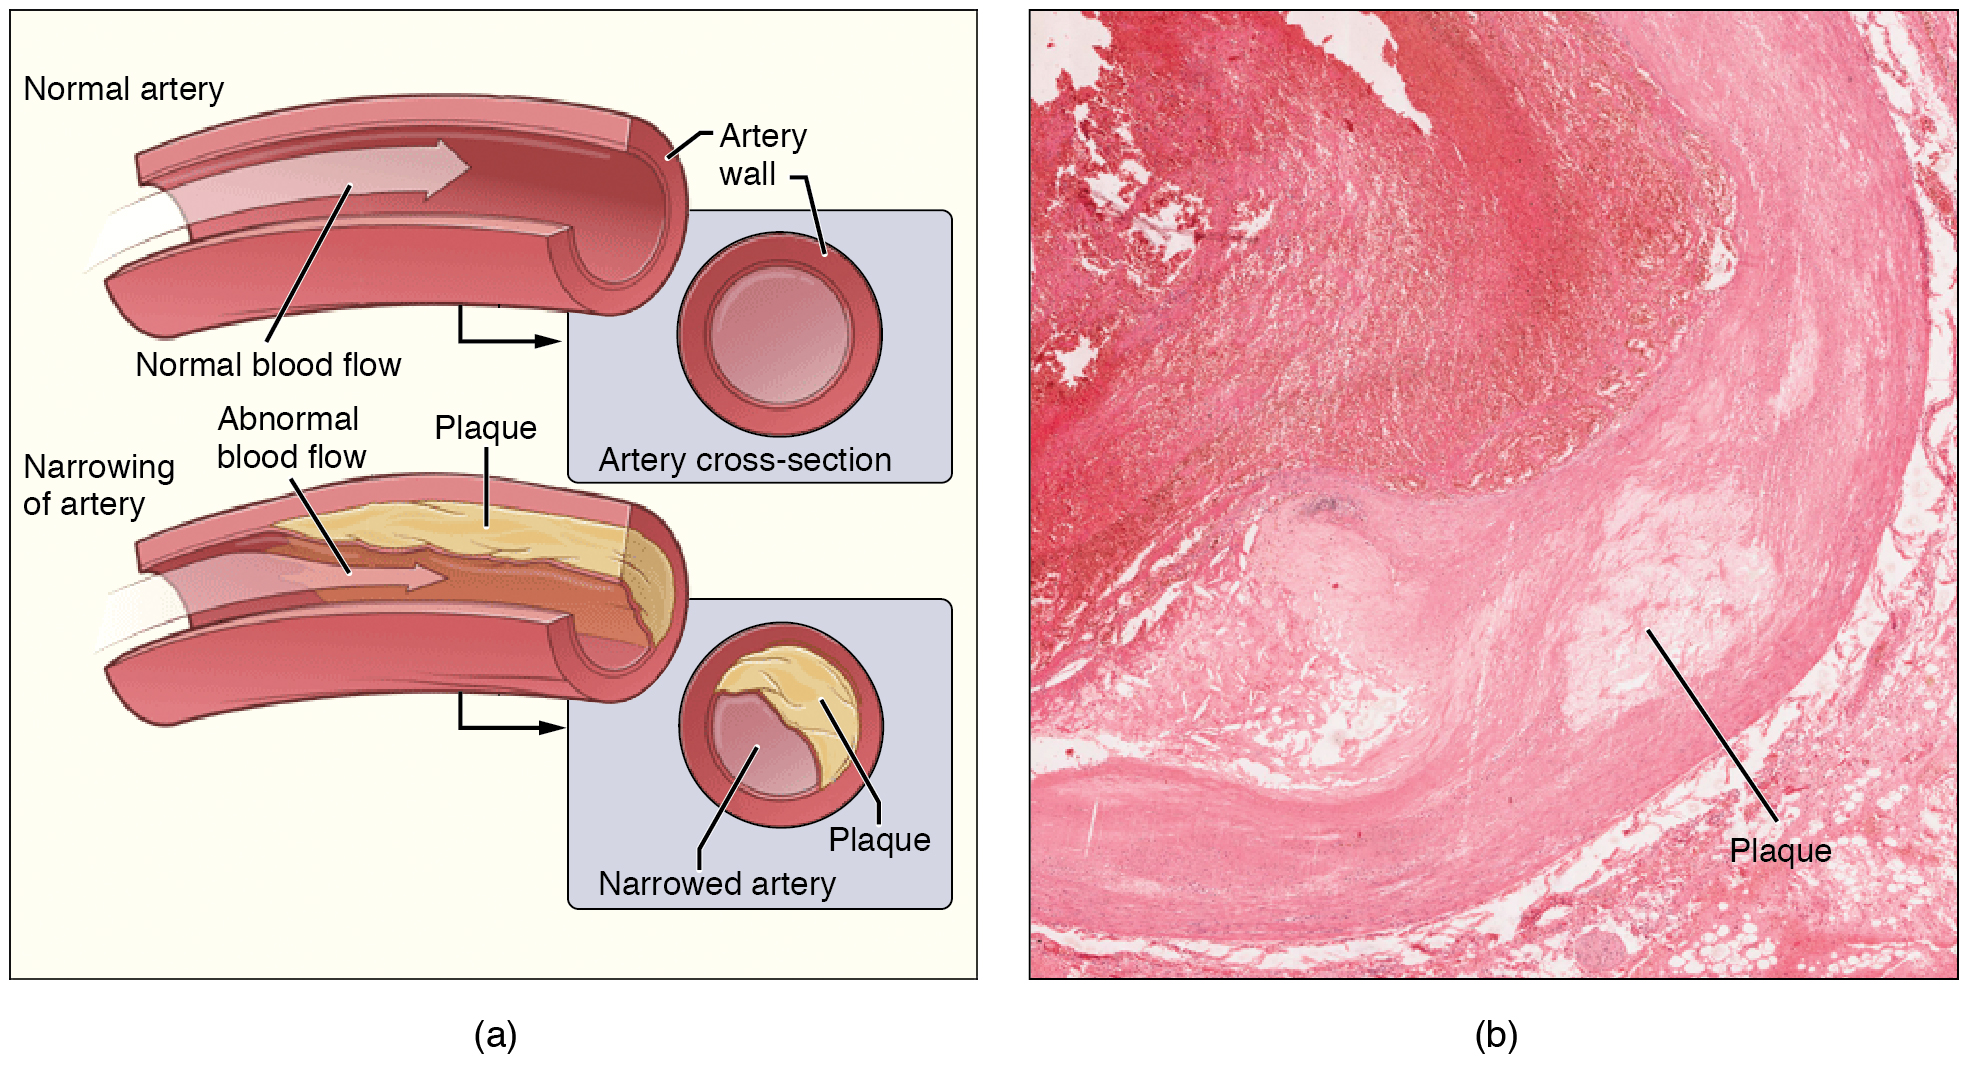 Atherosclerosis involves calcified, fatty plaques that build up in a damaged artery wall and narrow the diameter of the artery, causing ischemia.